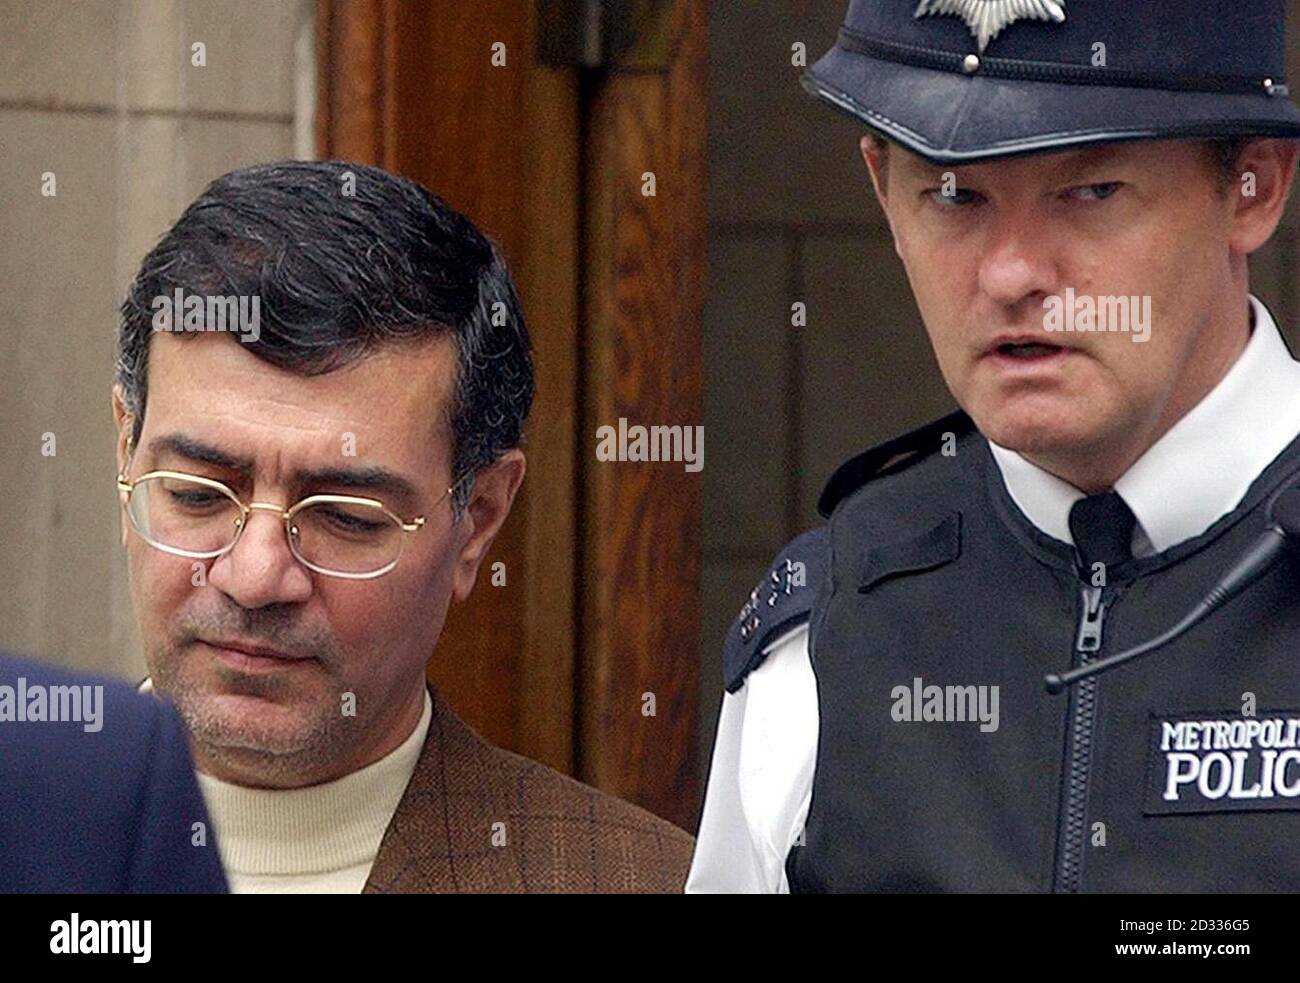 Former Iranian diplomat Hade Soleimanpour is led out by a police officer from Bow Street Magistrates Court. Soleimanpour is facing extradition charges following a bombing in Argentina nine years ago. Stock Photo